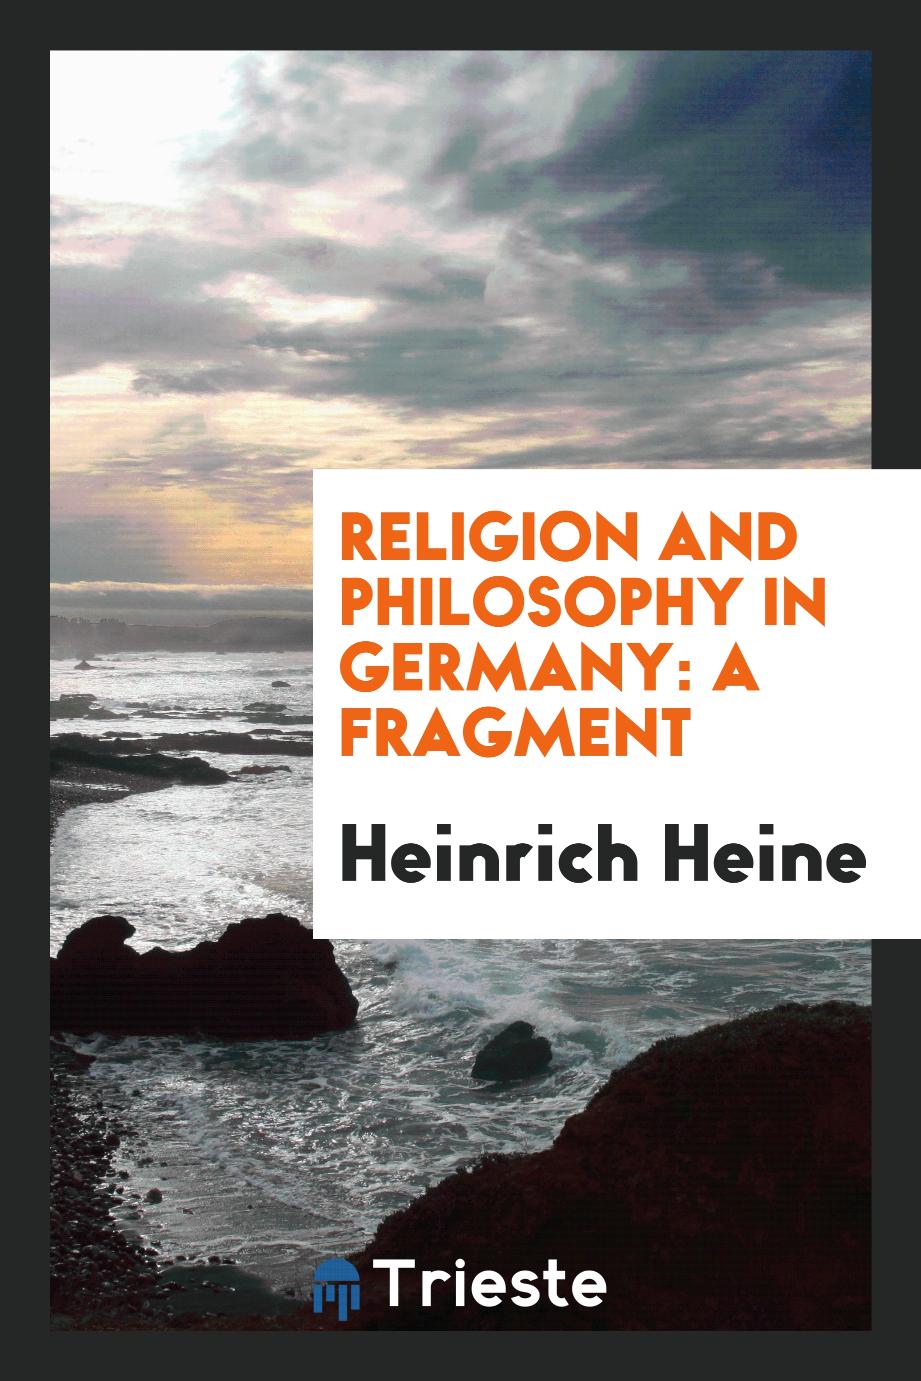 Religion and philosophy in Germany: a fragment